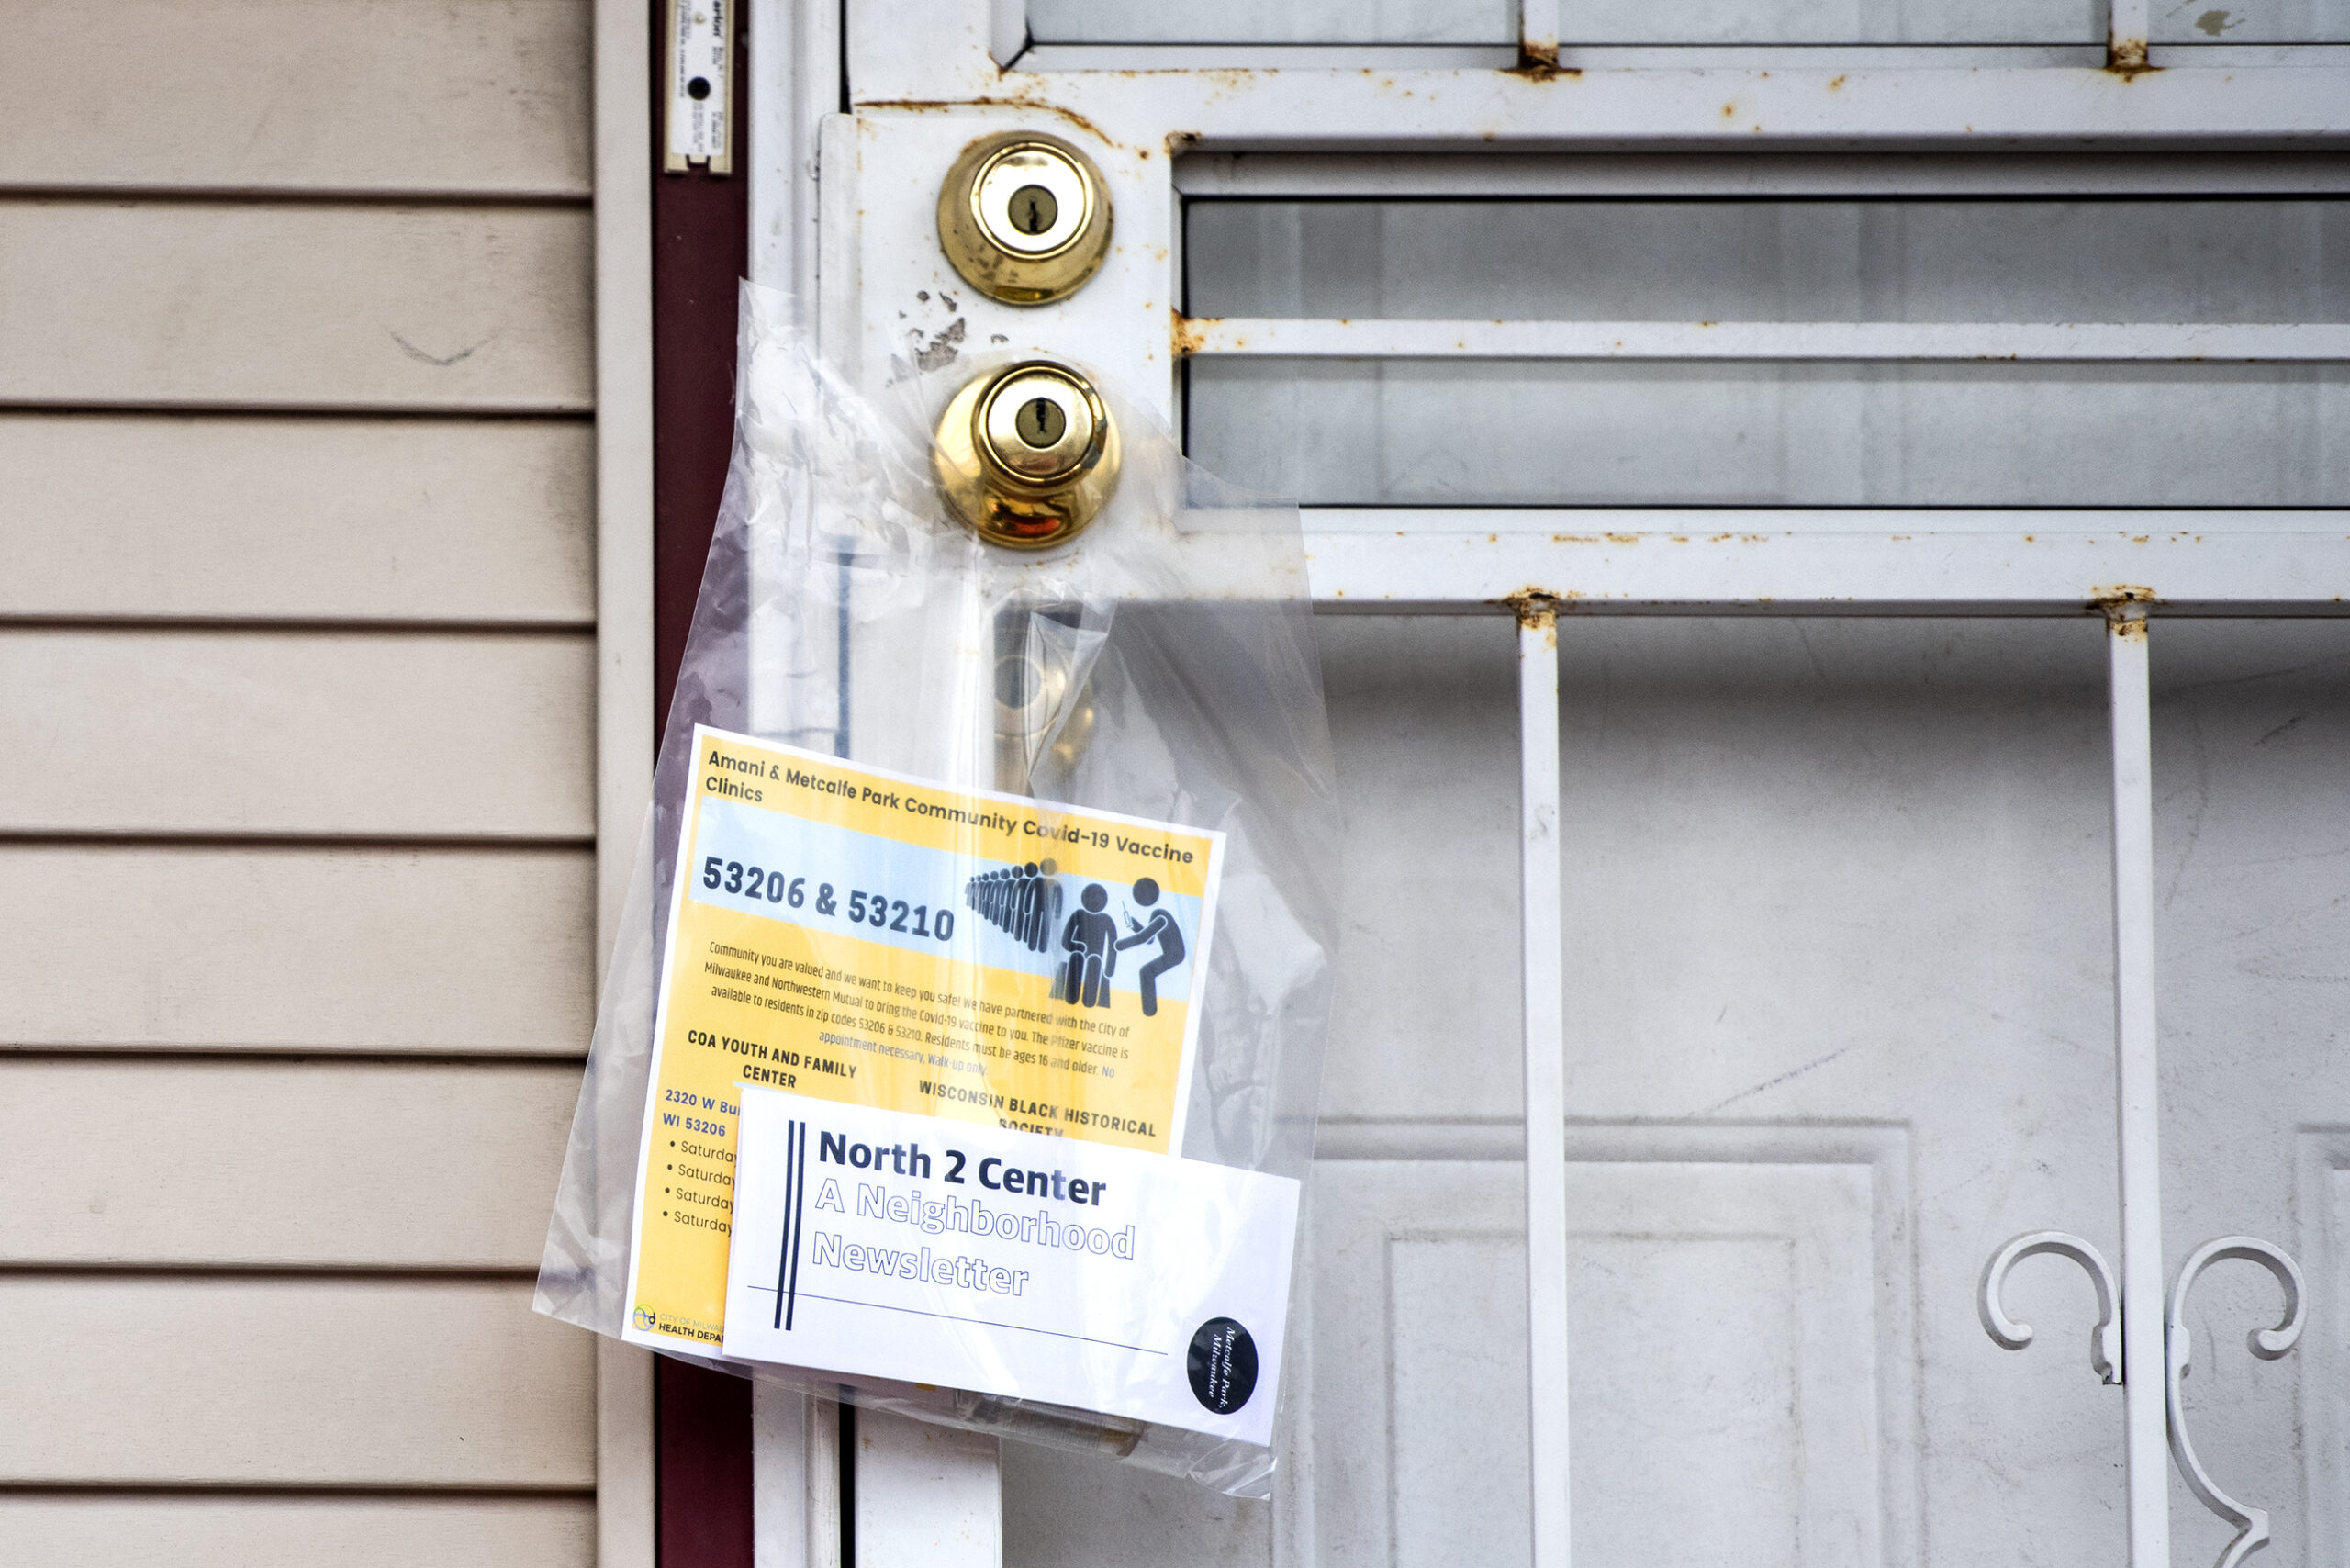 A plastic bag containing informational paperwork hangs on a doorknob.